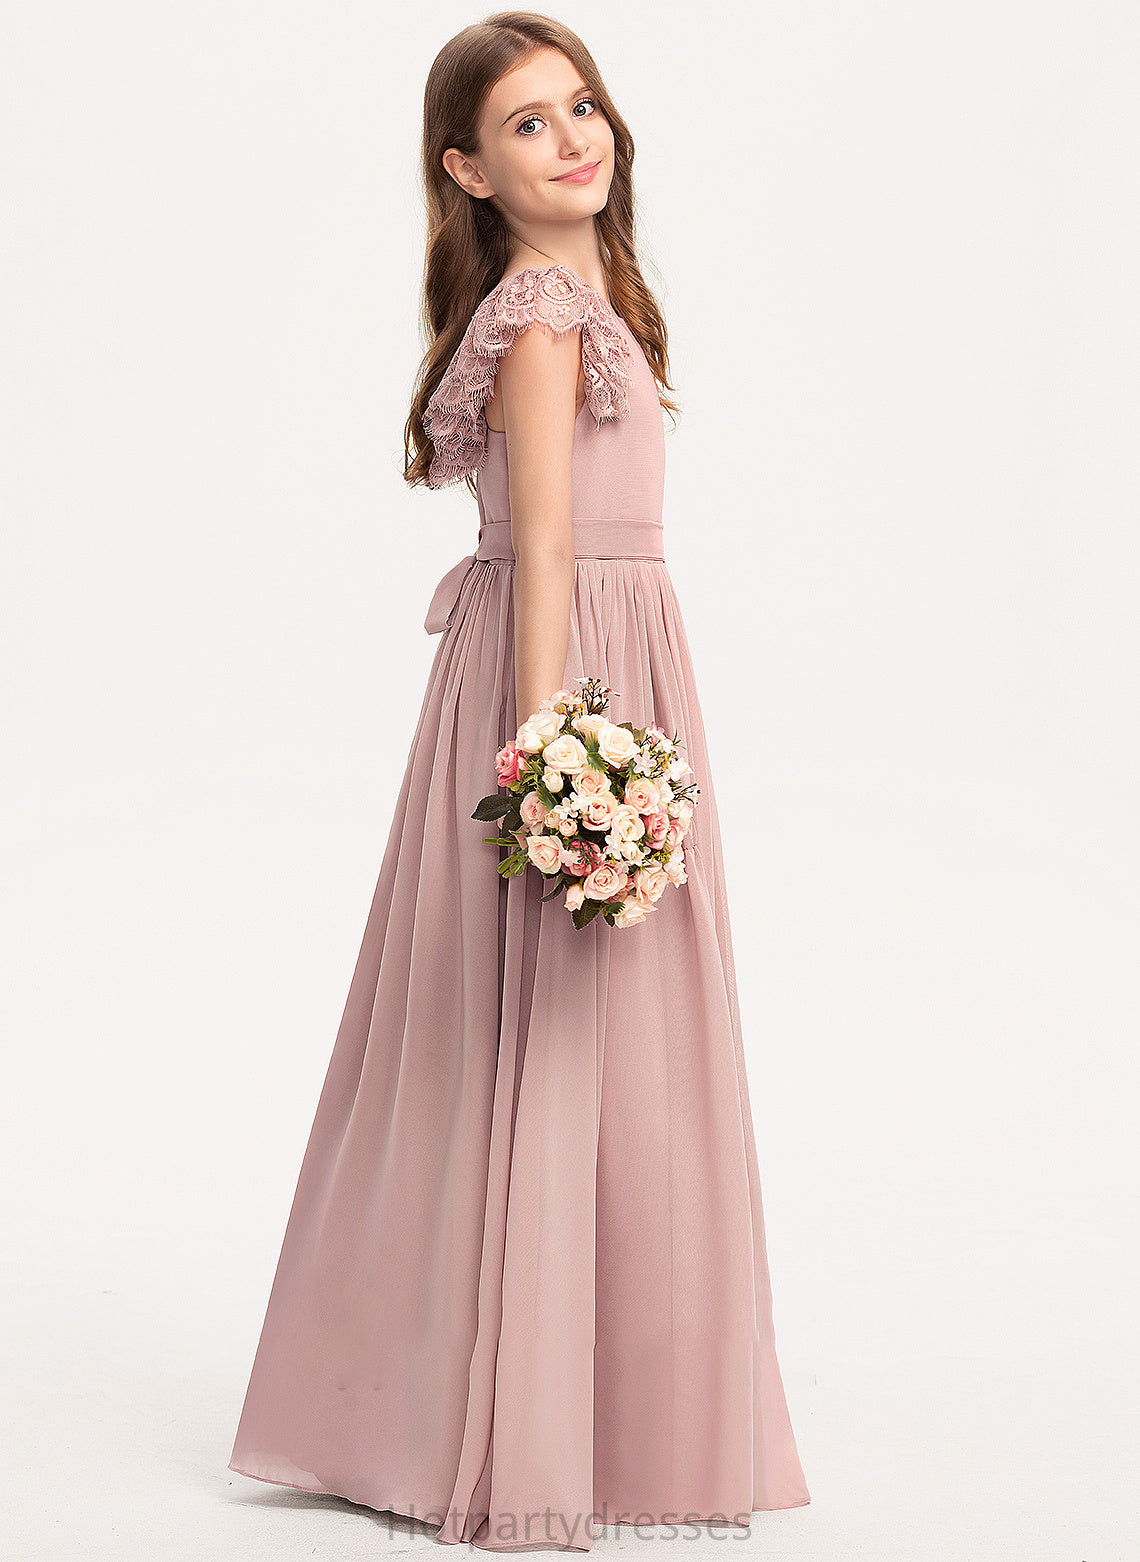 Chiffon Junior Bridesmaid Dresses Neck Kaylyn Lace With Scoop Floor-Length Bow(s) A-Line